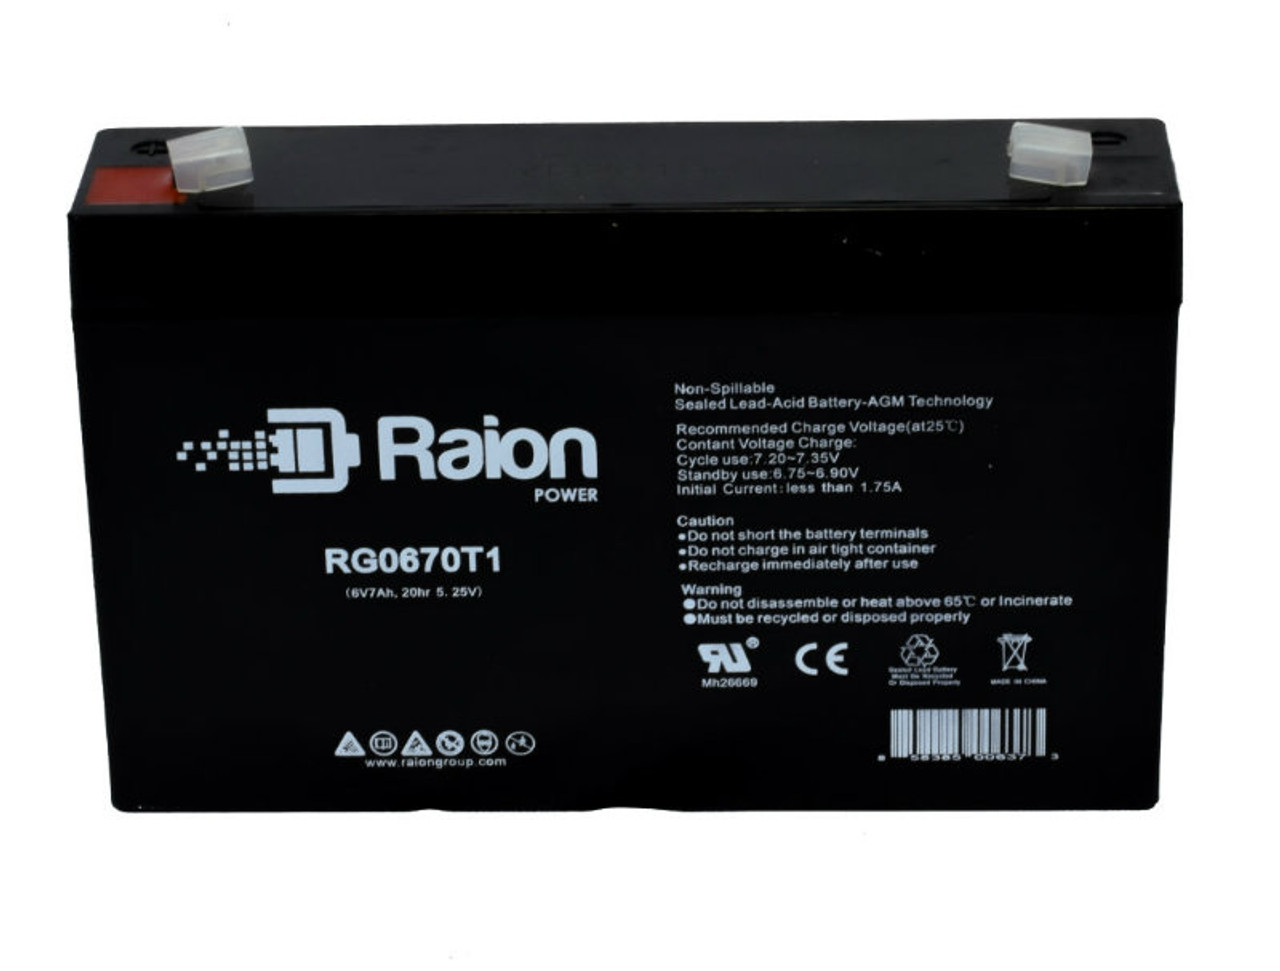 Raion Power RG0670T1 Replacement Battery Cartridge for Chloride-Lightguard 100001134